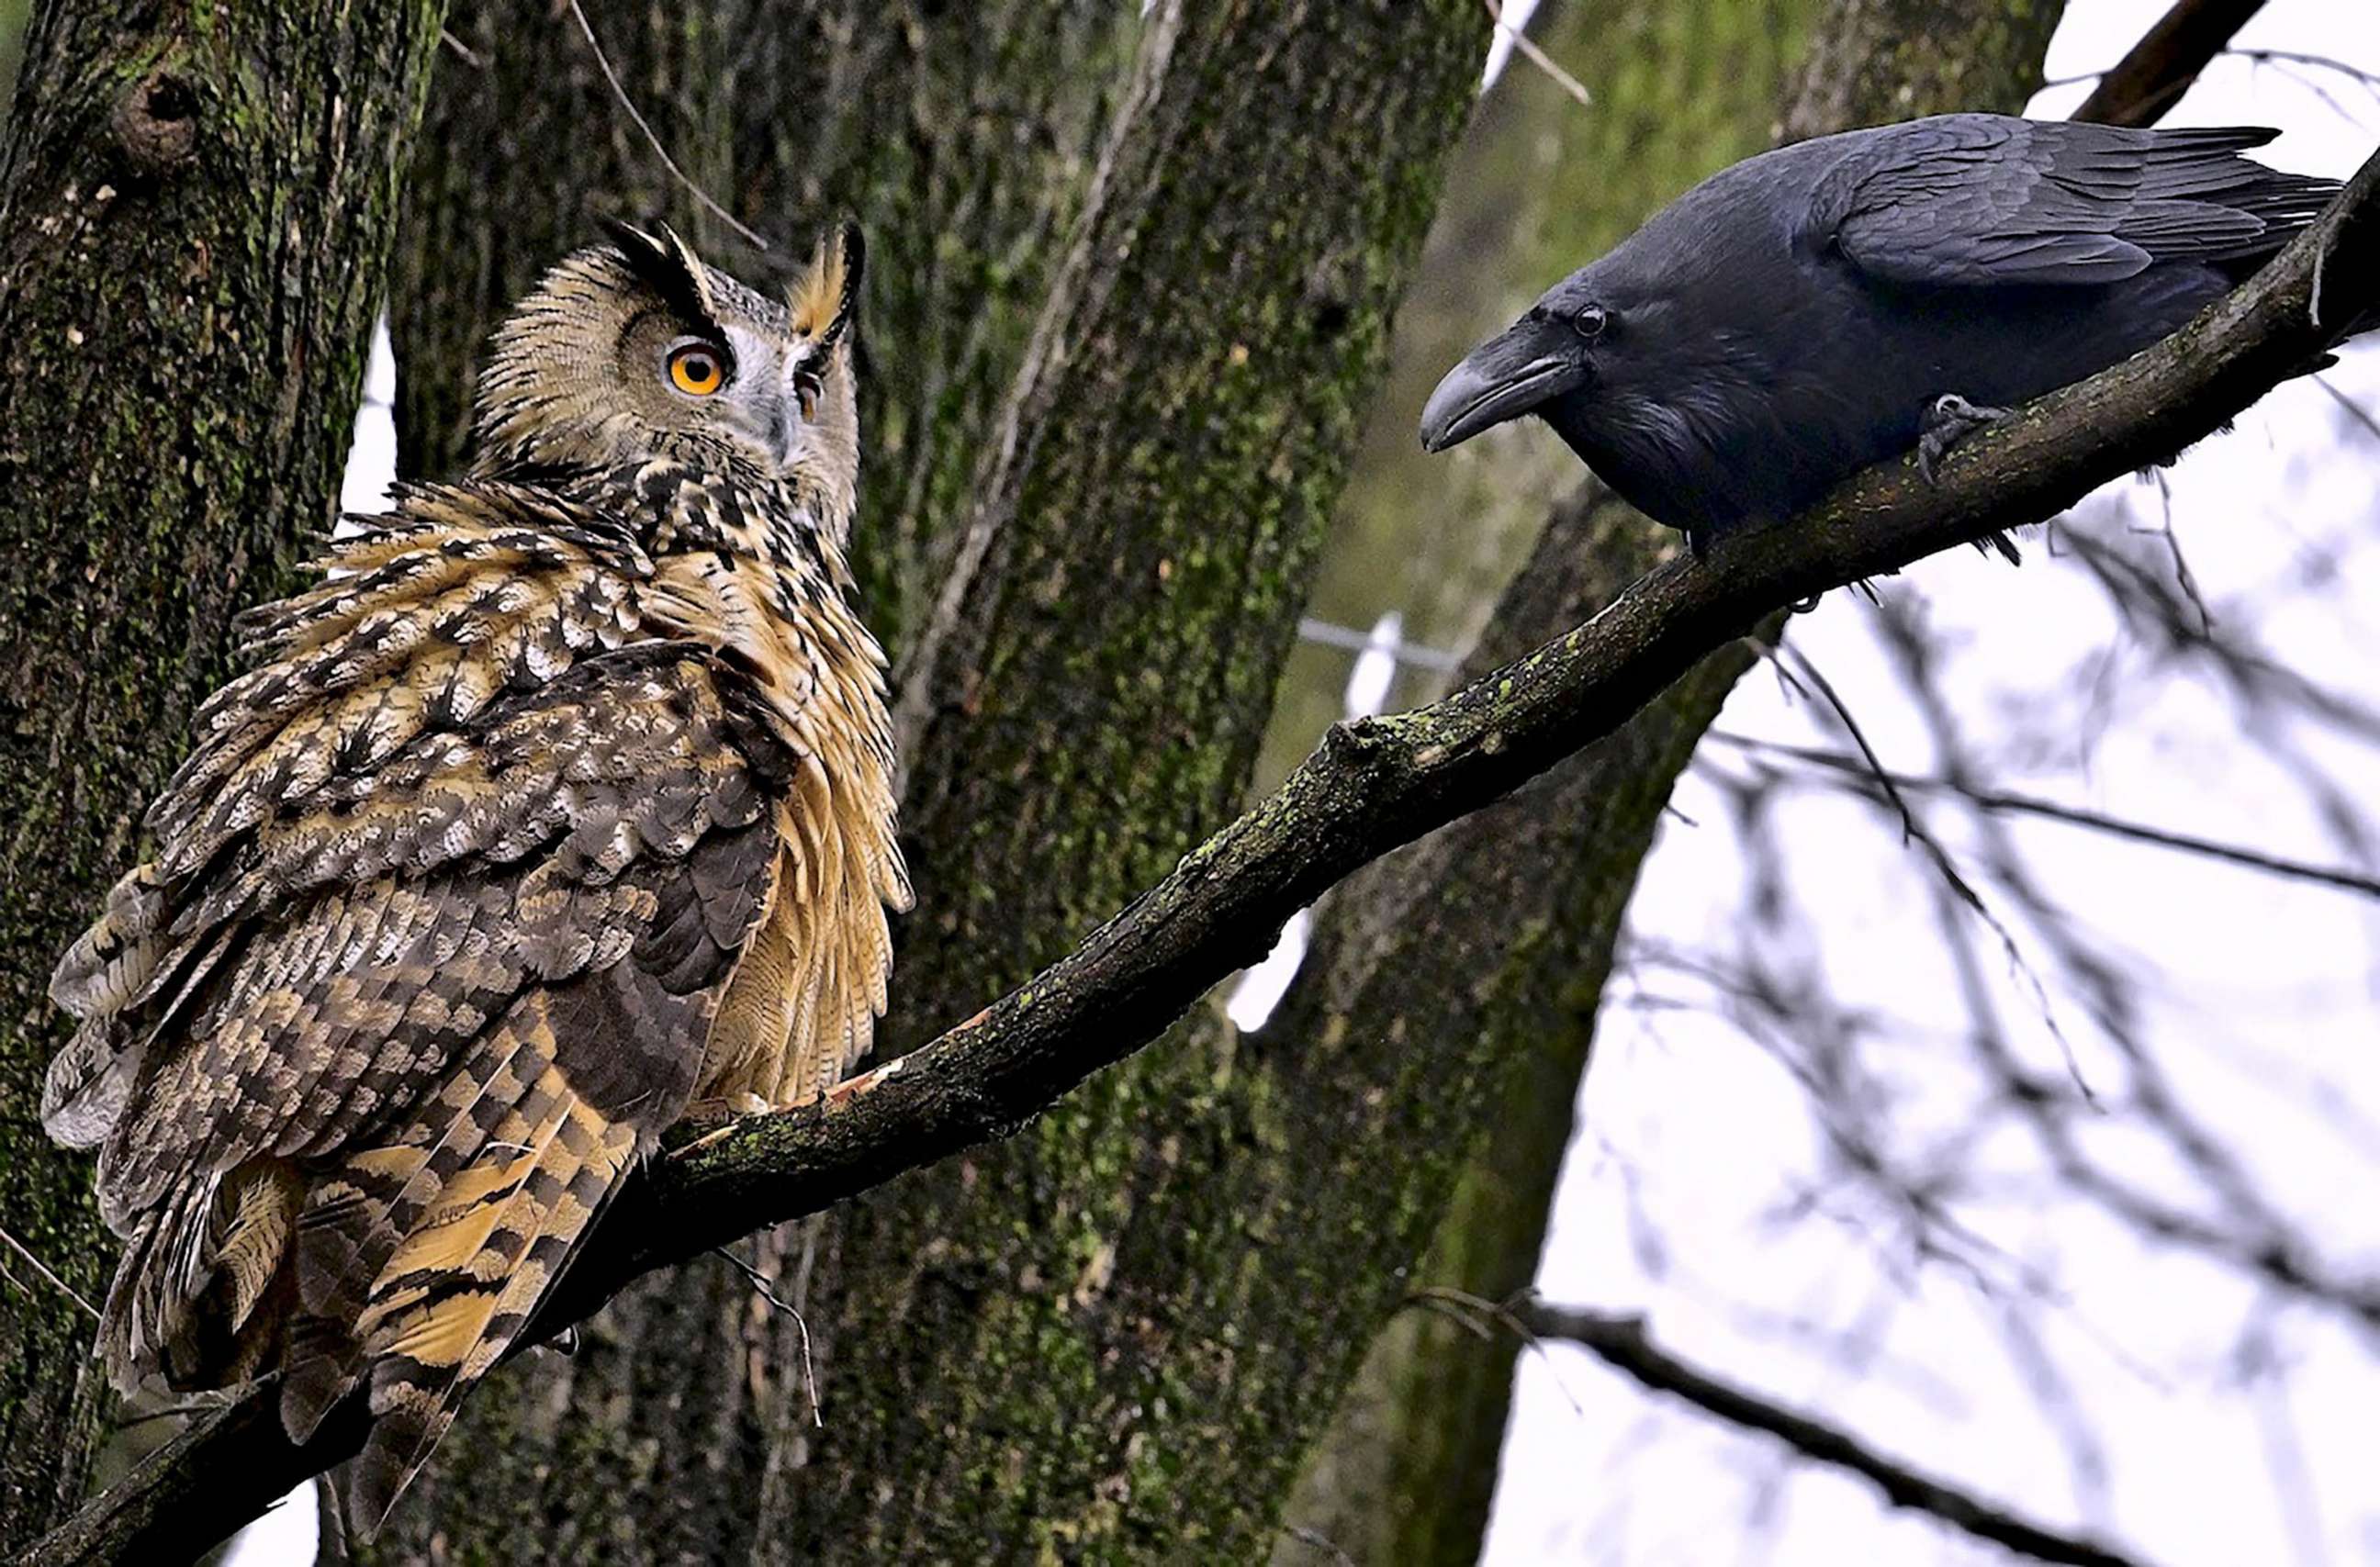 PHOTO: Flaco, the Eurasian eagle owl who escaped from his vandalized Central Park Zoo enclosure, seen on Feb. 17, 2023, showing he can defend himself, ruffling his feathers, puffing himself up and lunging at a raven that invaded his space.